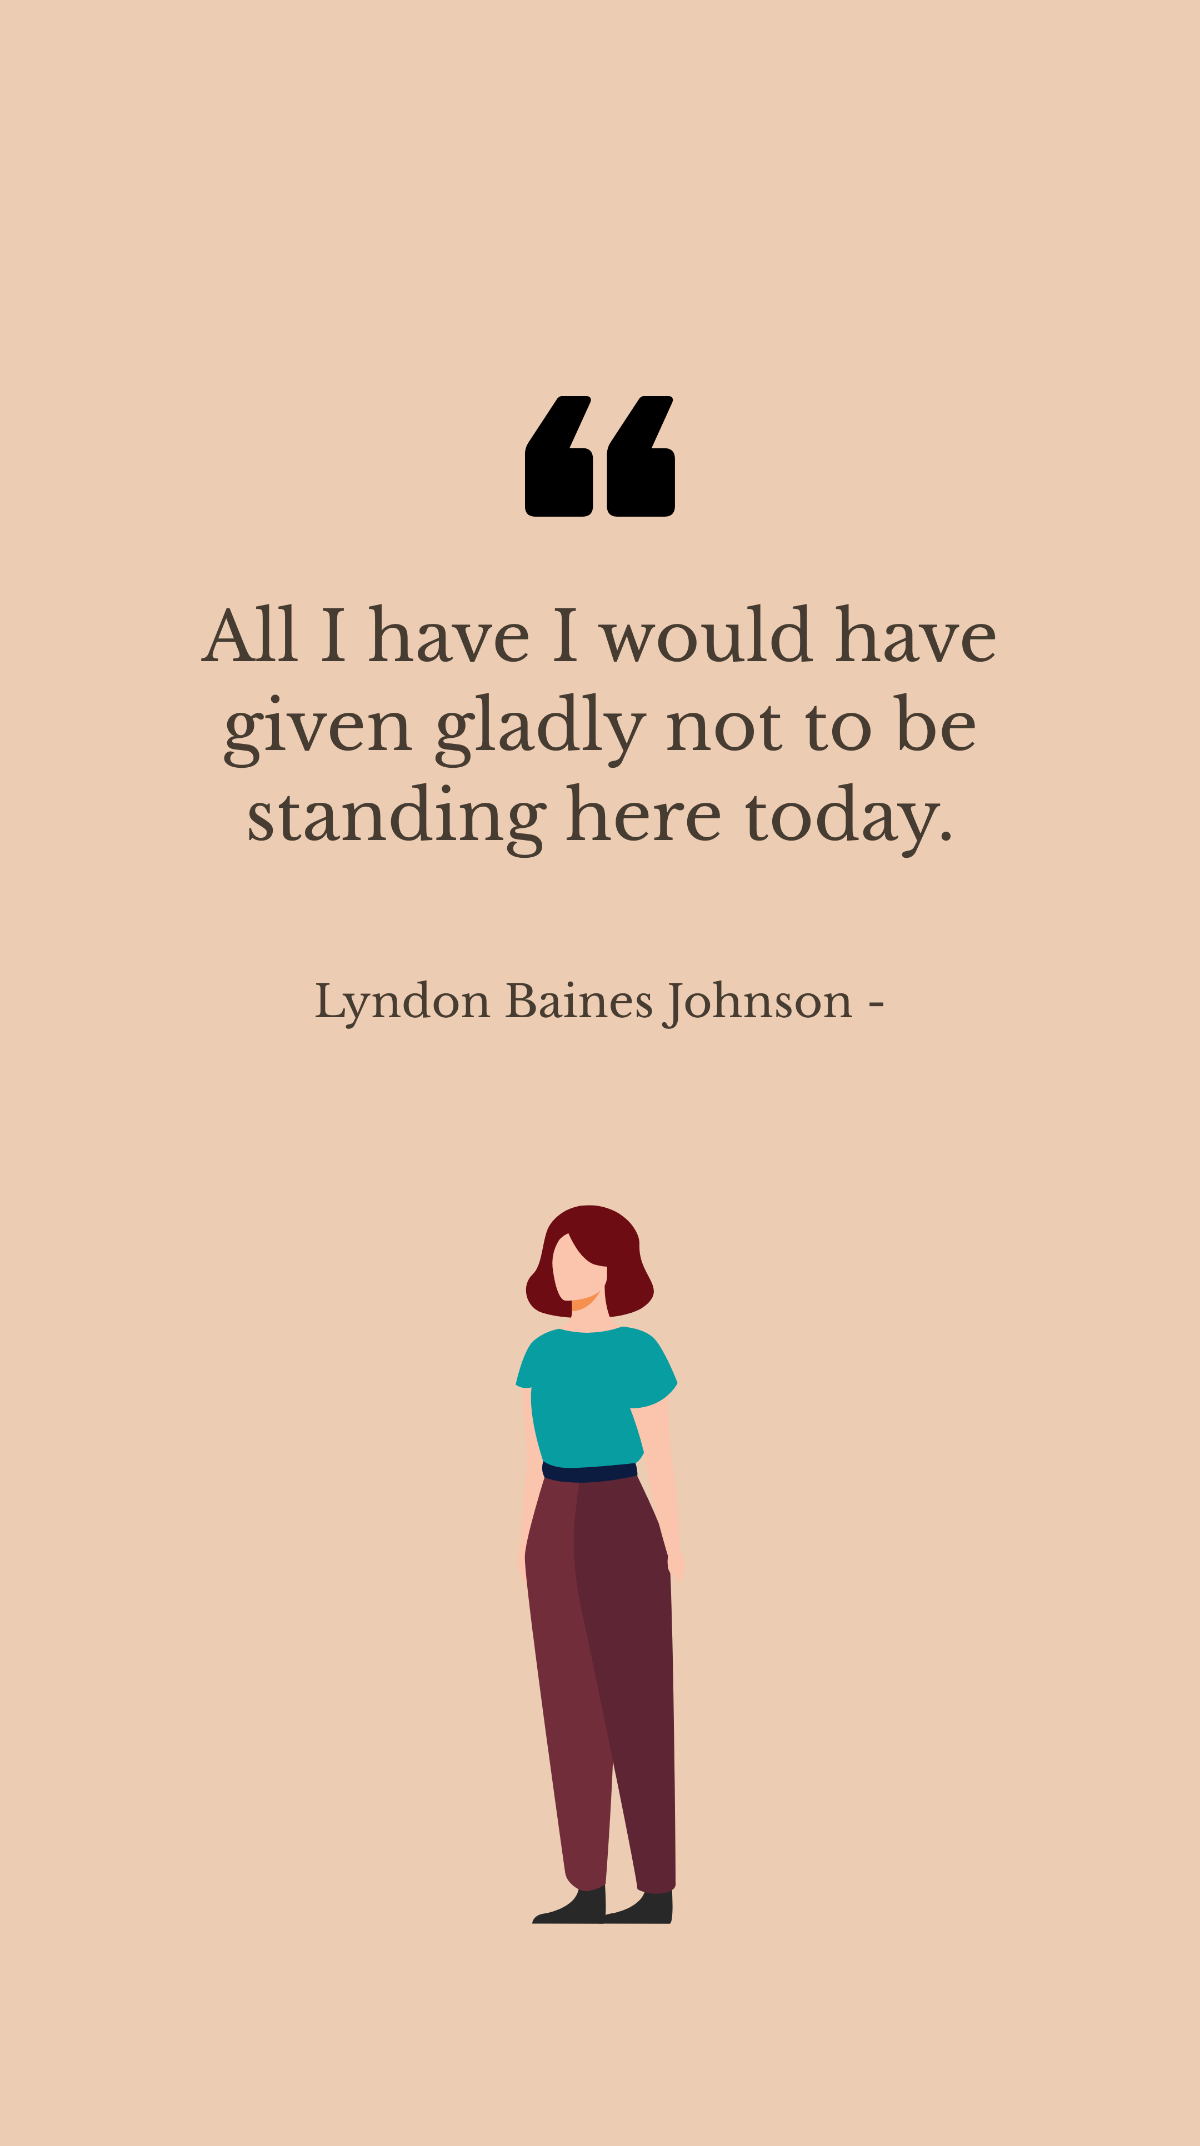 Lyndon Baines Johnson - All I have I would have given gladly not to be standing here today. Template